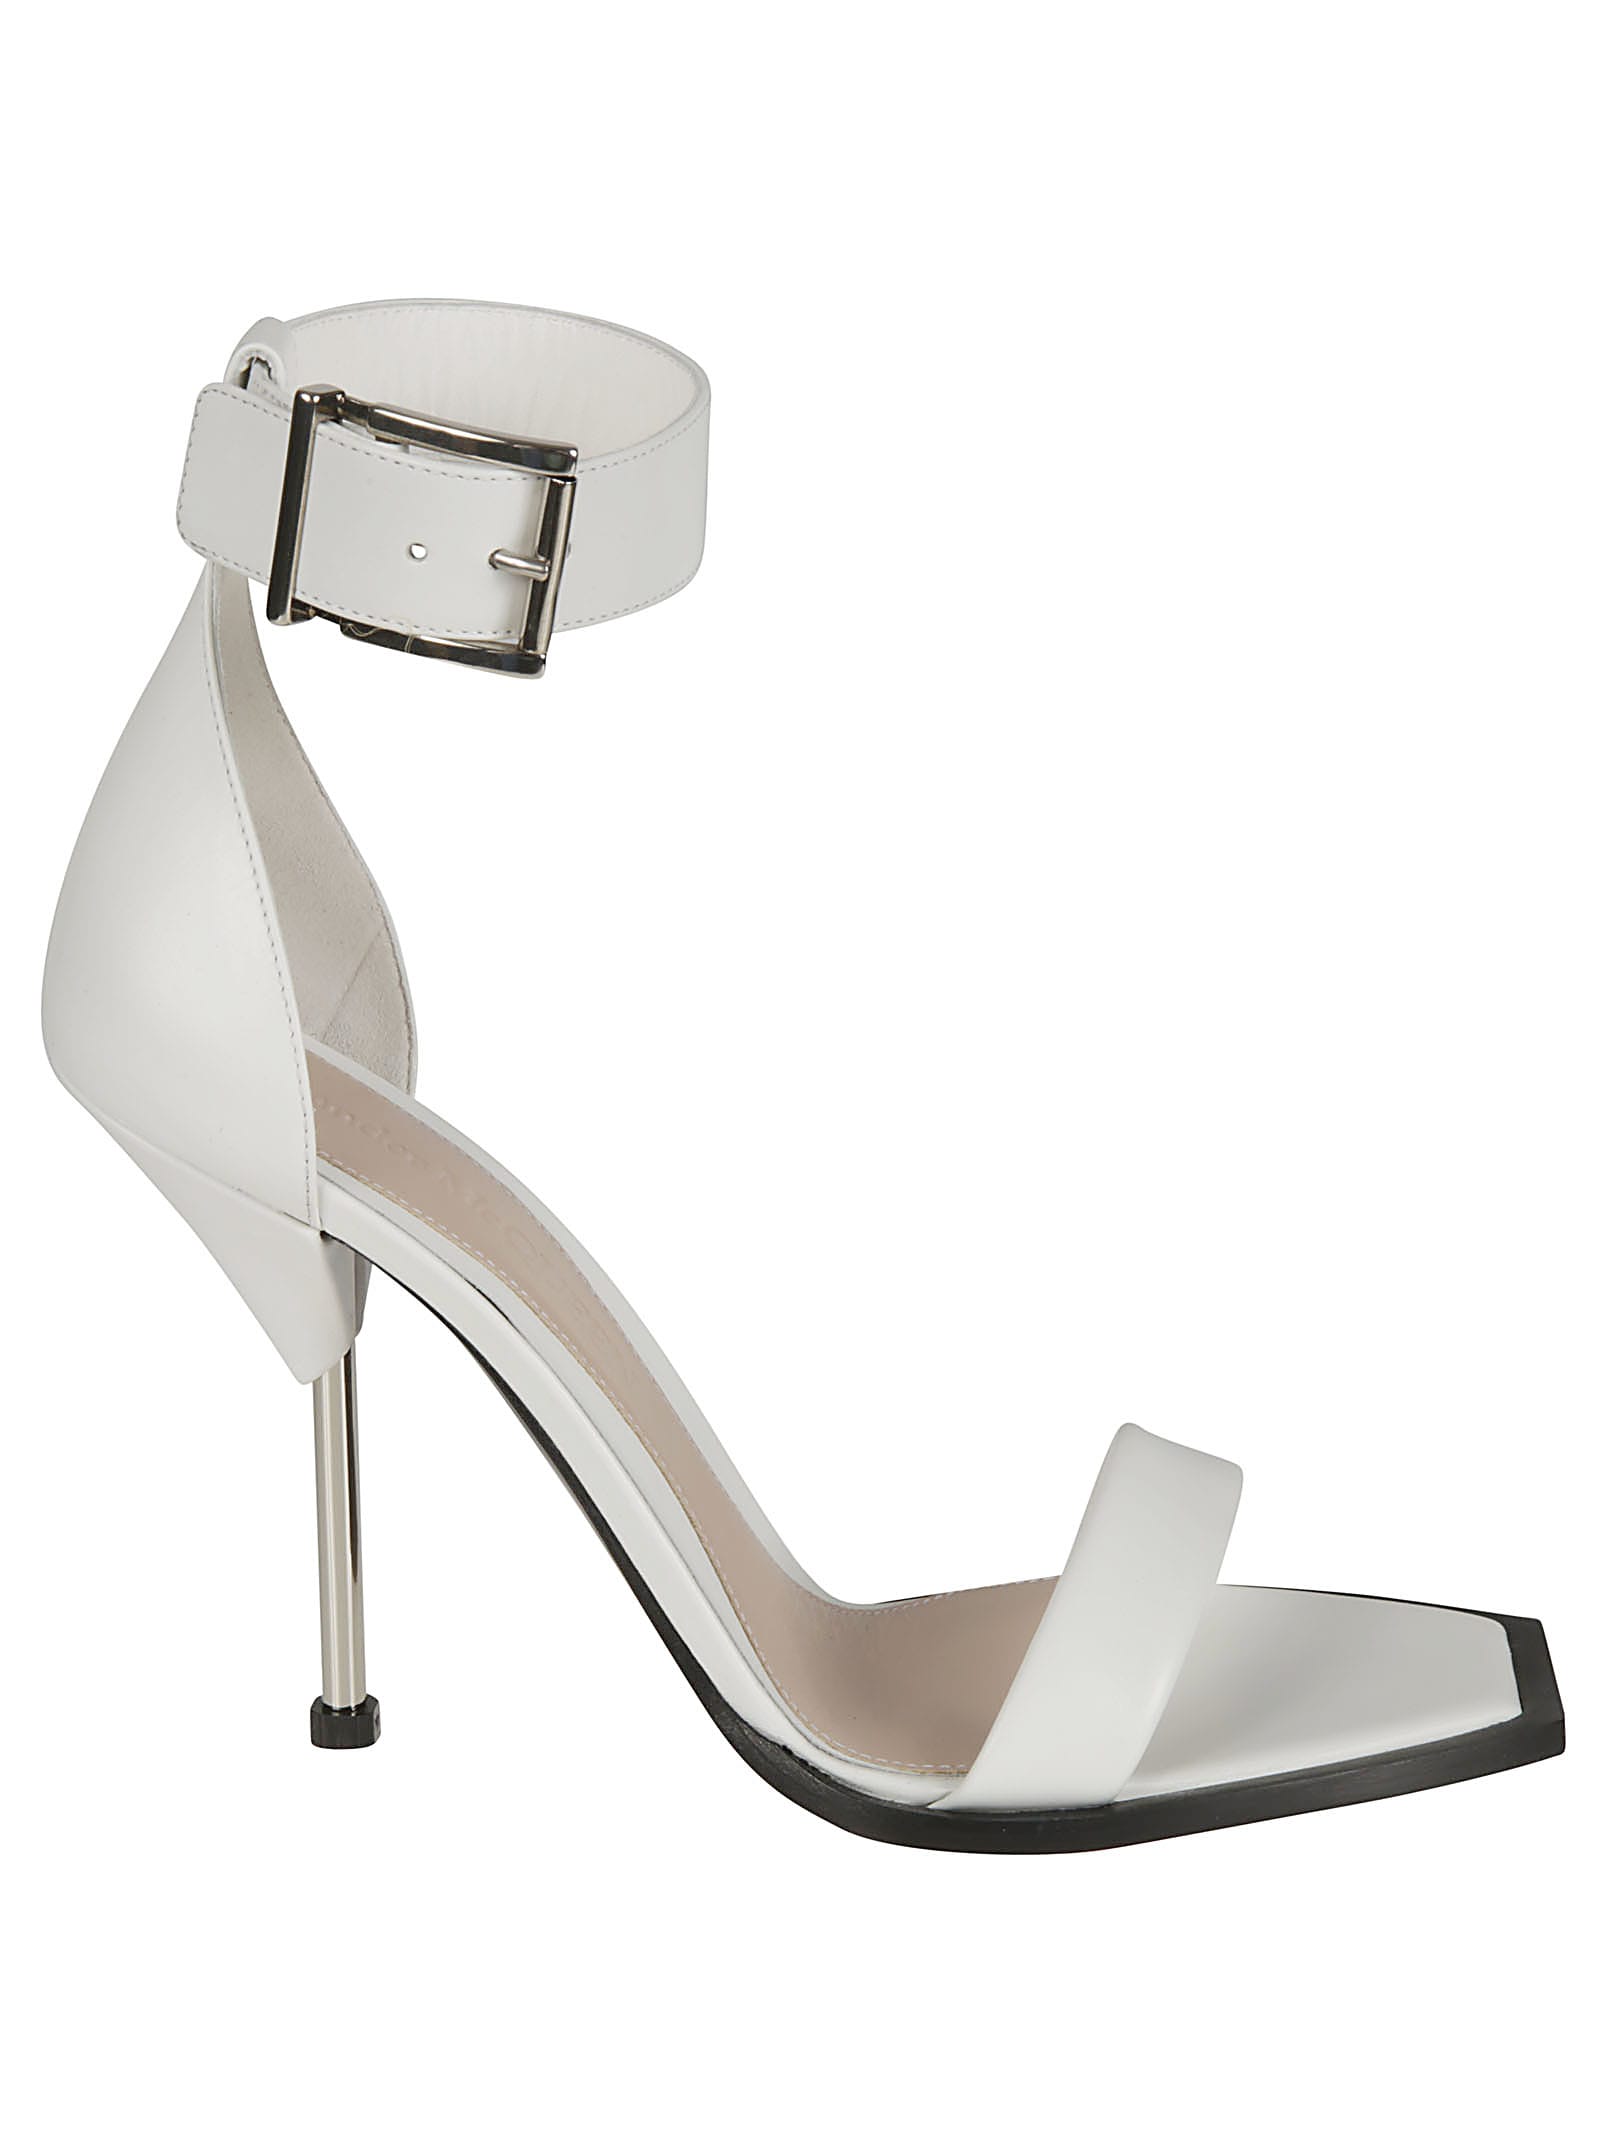 Buy Alexander McQueen High Ankle Buckle Strap High Heel Sandals online, shop Alexander McQueen shoes with free shipping